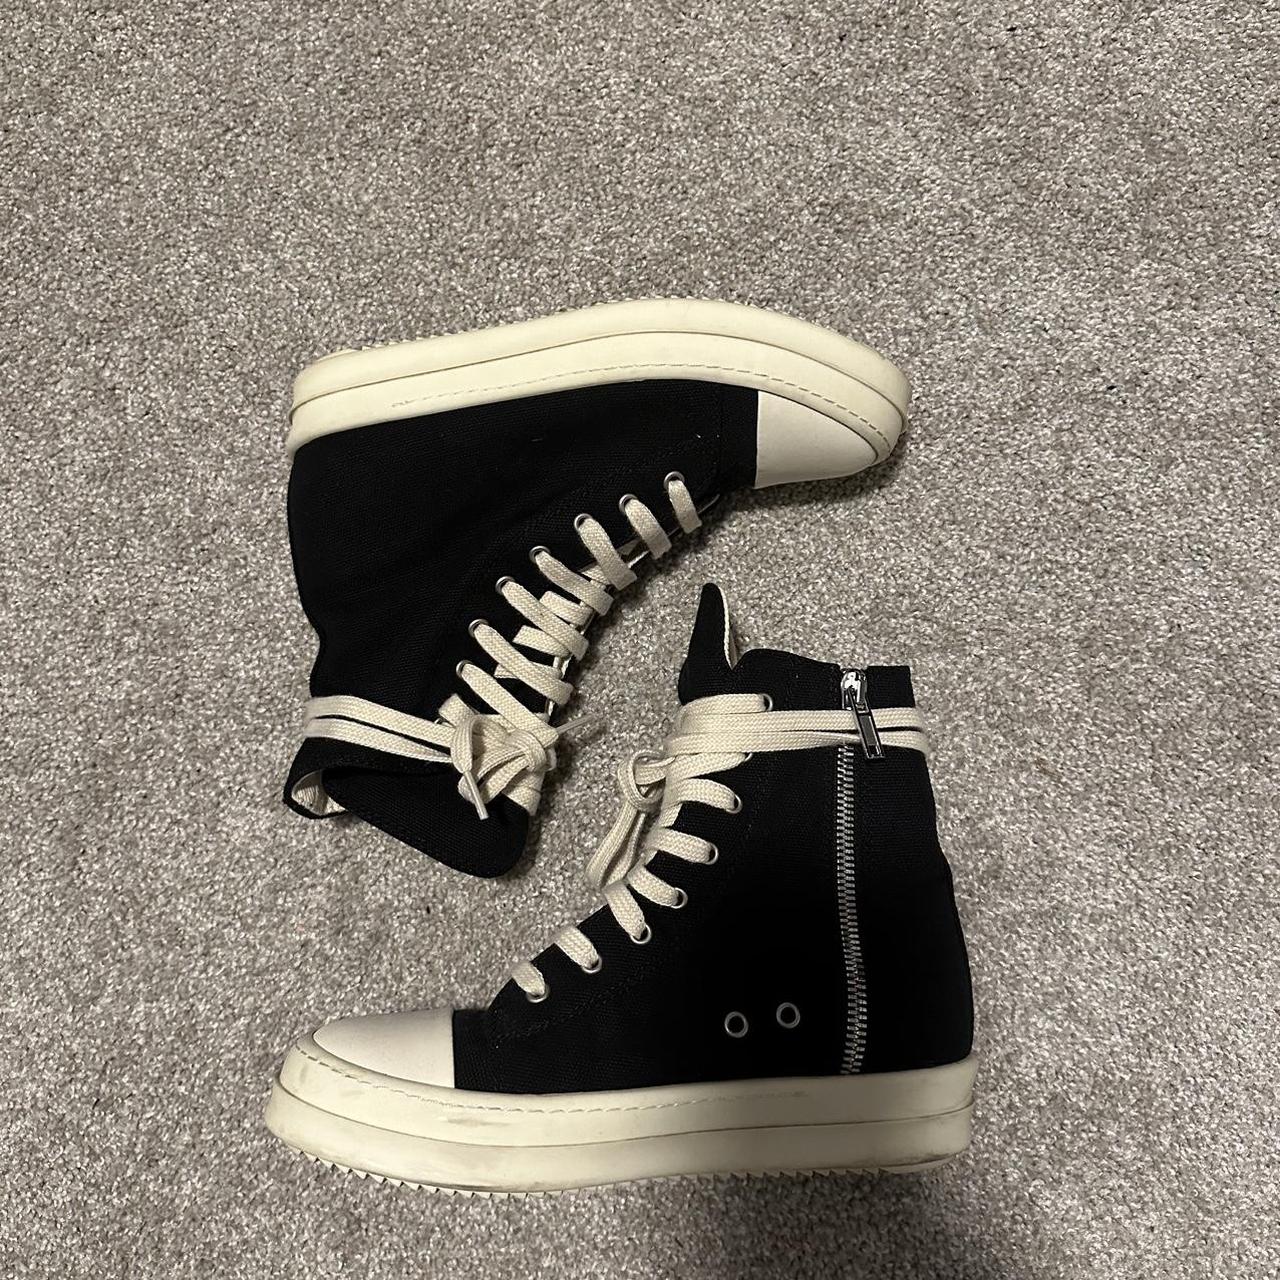 Rick Owens DRKSHDW Size 38 EU Comes with box (This... - Depop